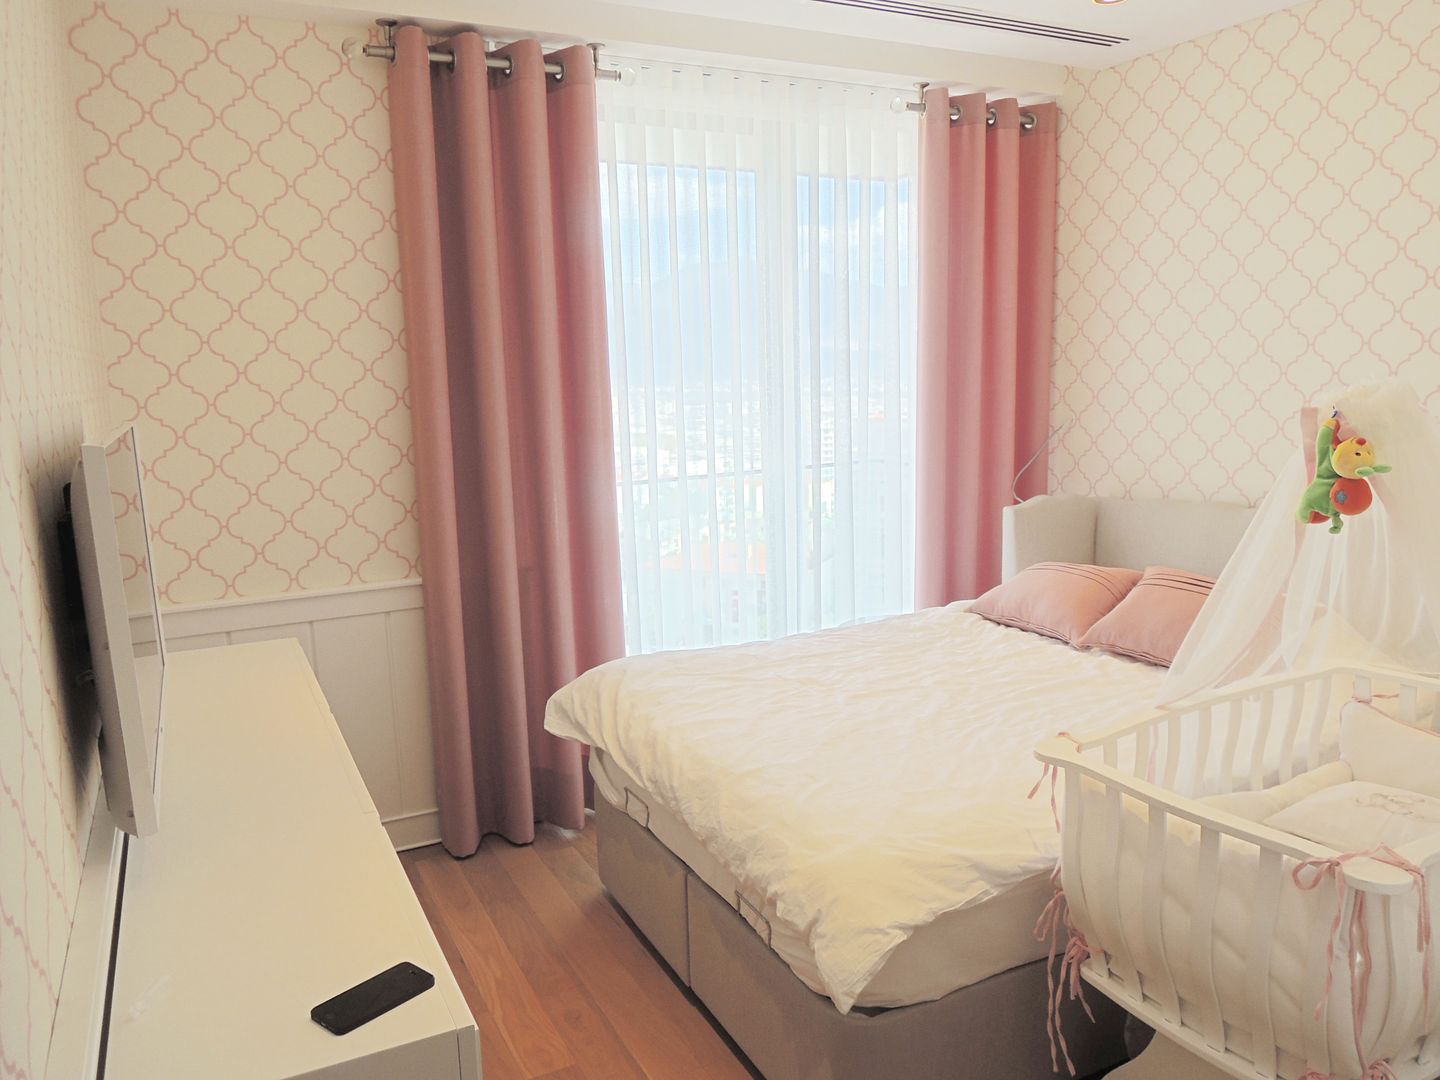 A Project by Visage Home Style , Visage Home Style Visage Home Style Moderne Schlafzimmer